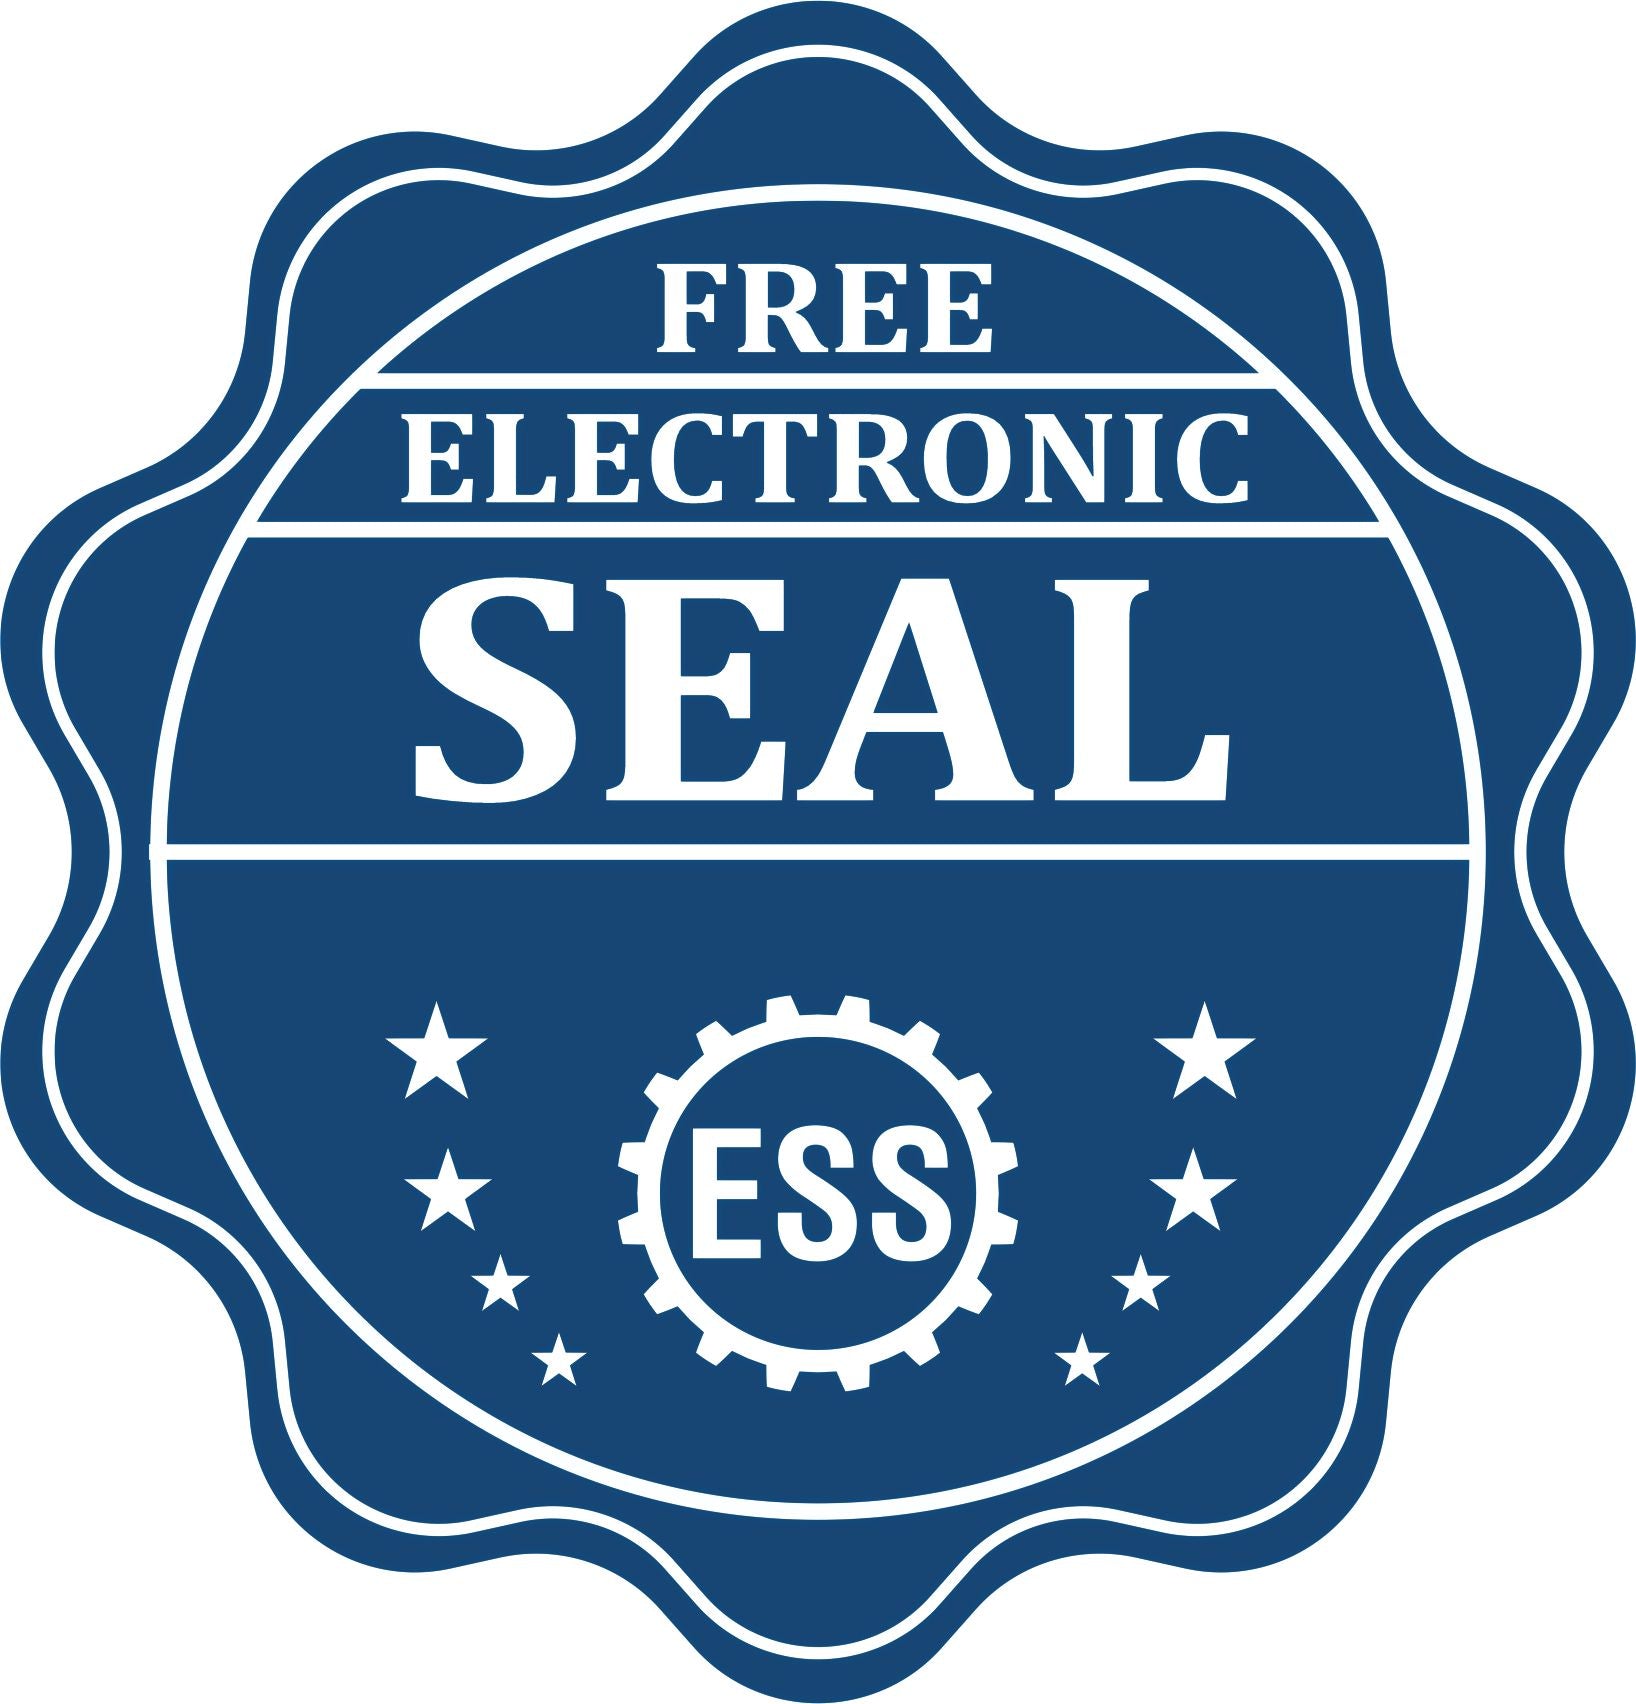 A badge showing a free electronic seal for the Hybrid Nebraska Land Surveyor Seal with stars and the ESS gear on the emblem.